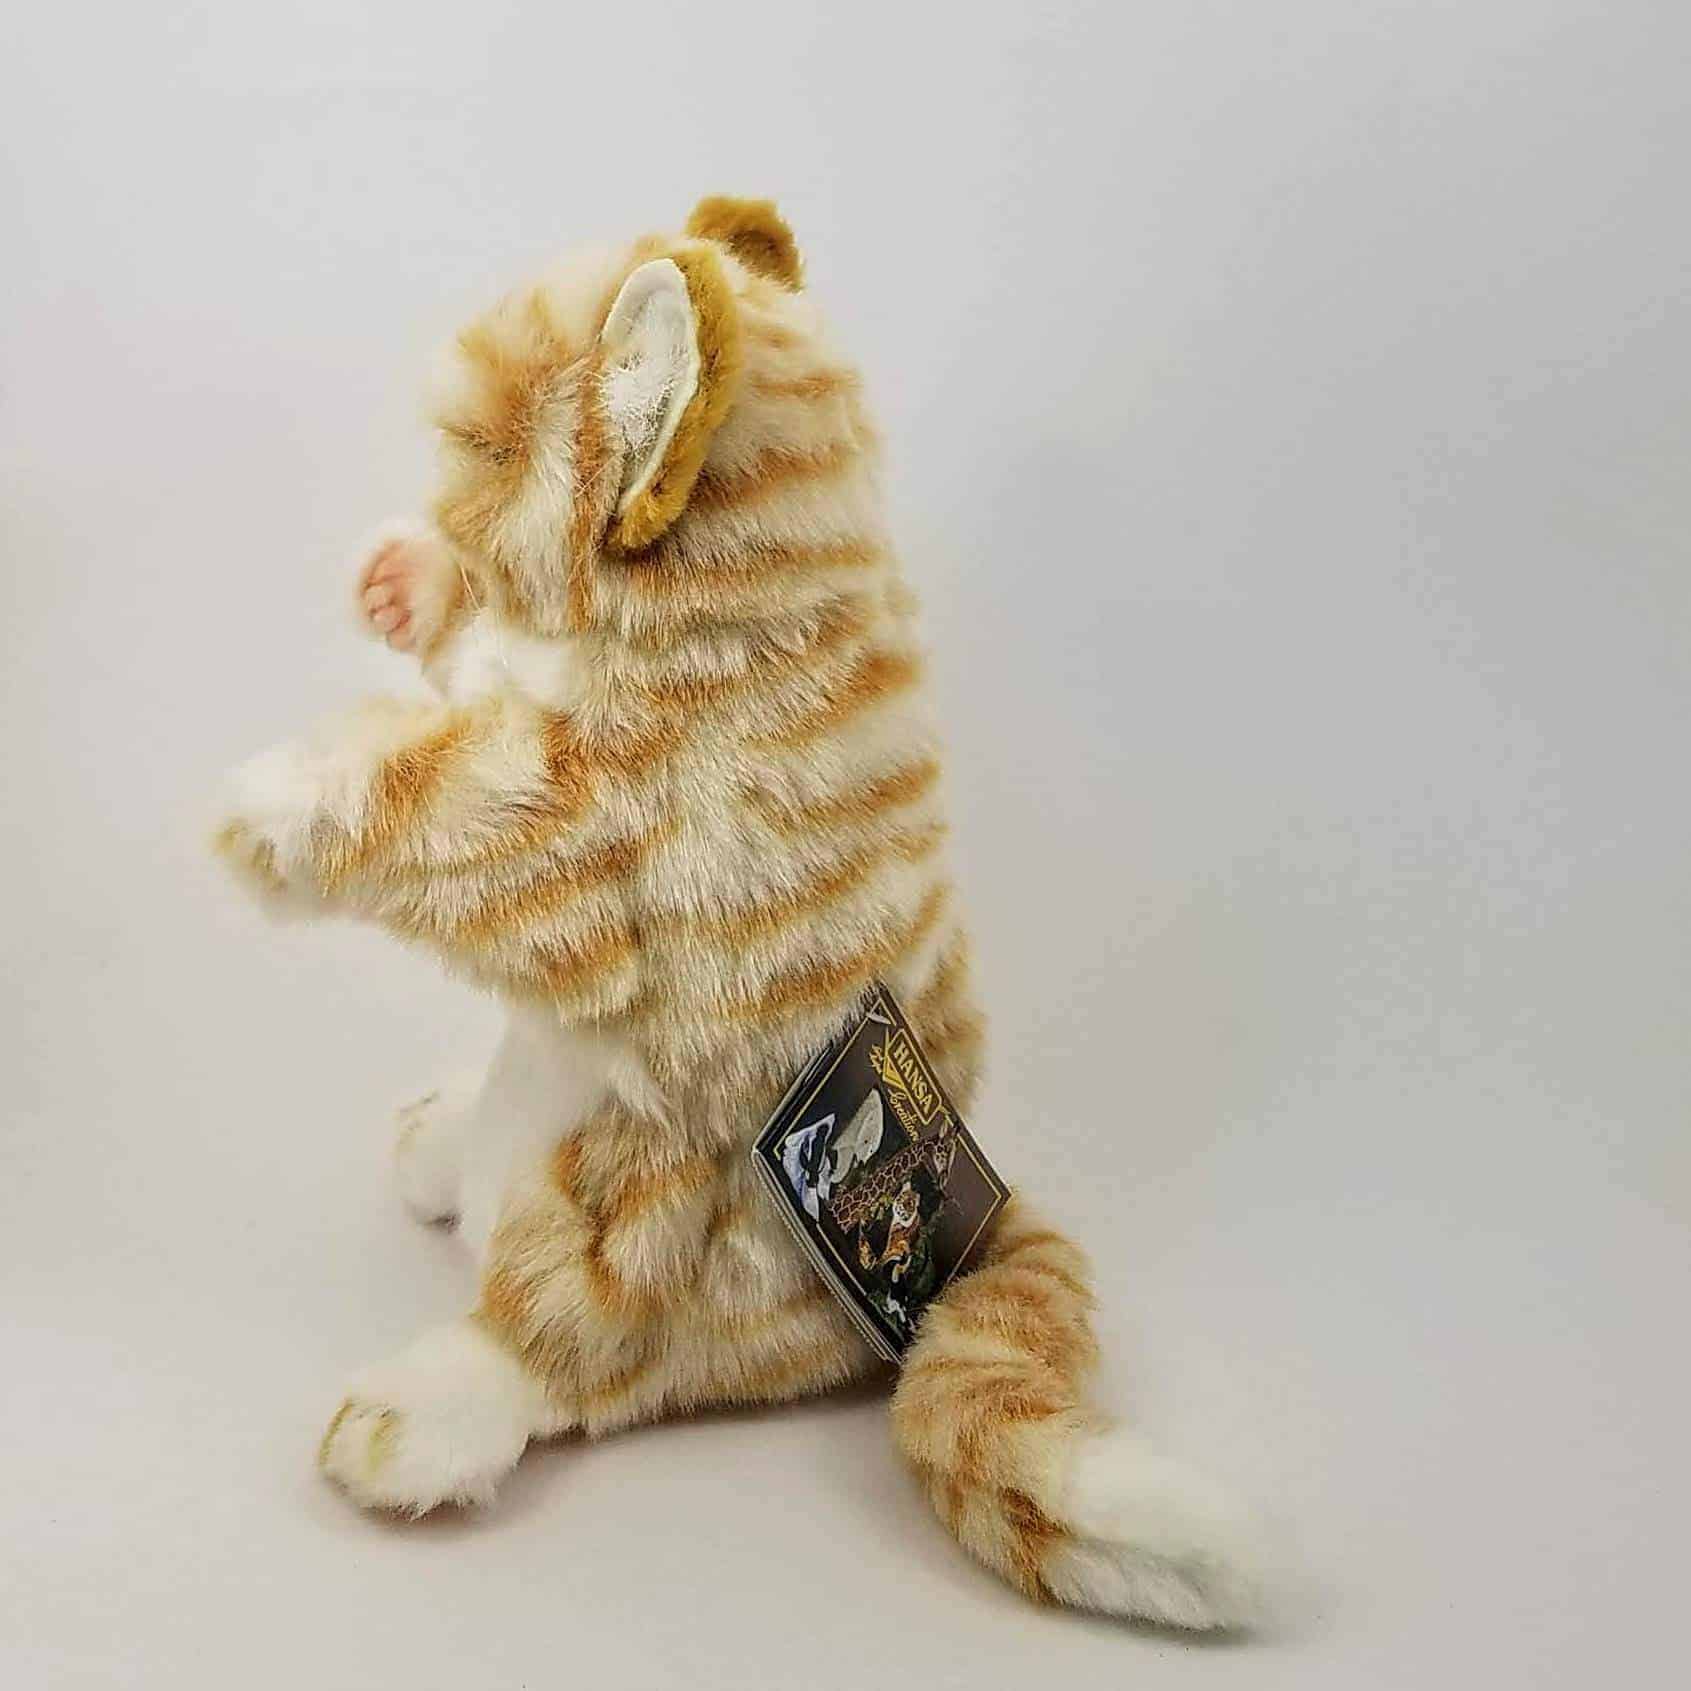 This Ginger Cat Hand Puppet by Hansa True to Life Looking Soft Plush Animal Learning Toy is made with love by Premier Homegoods! Shop more unique gift ideas today with Spots Initiatives, the best way to support creators.